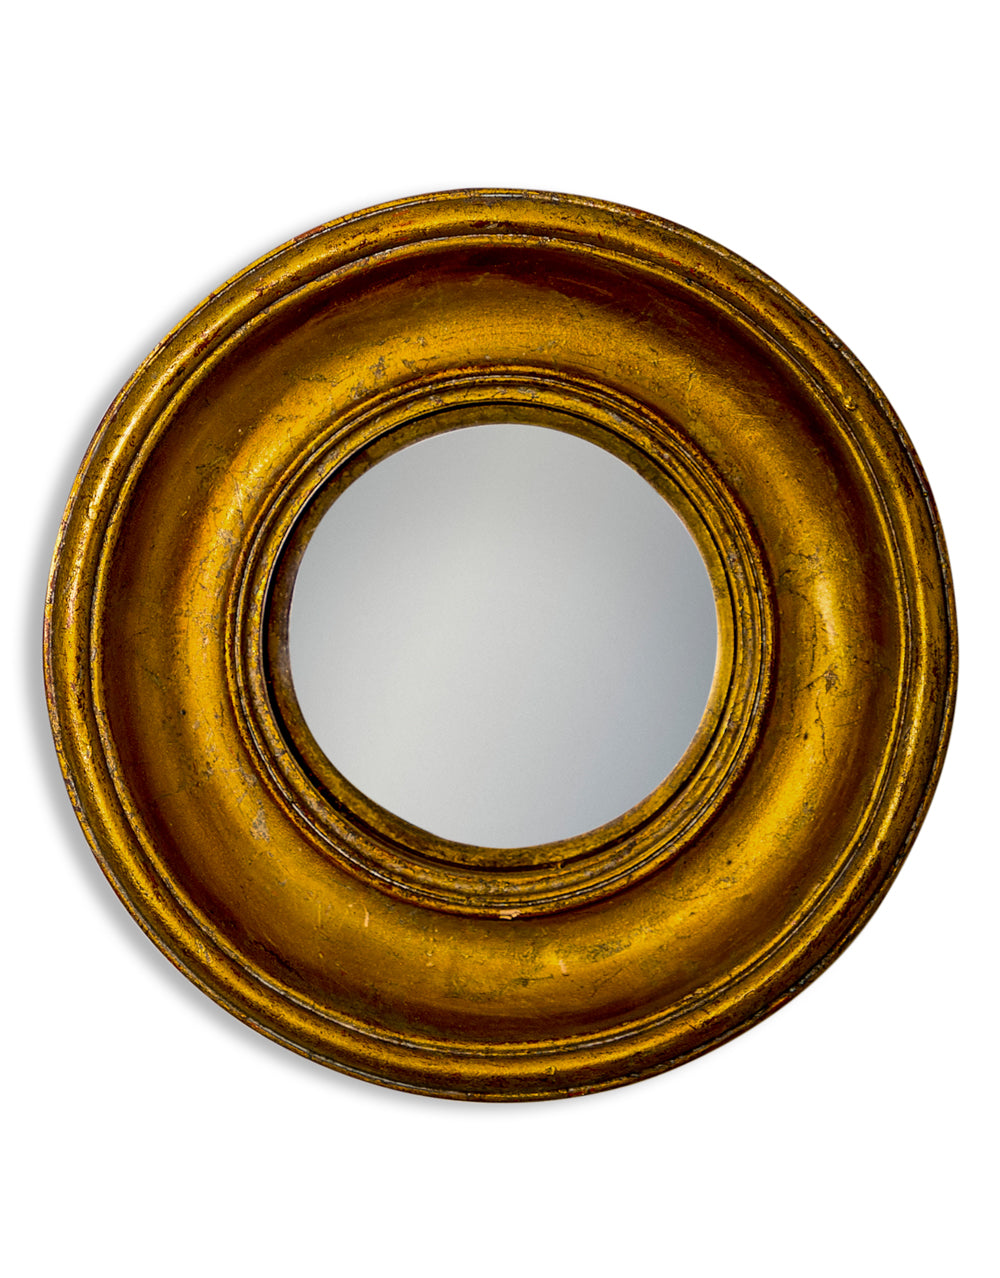 Antiqued Gold Deep Framed Small Convex Mirror